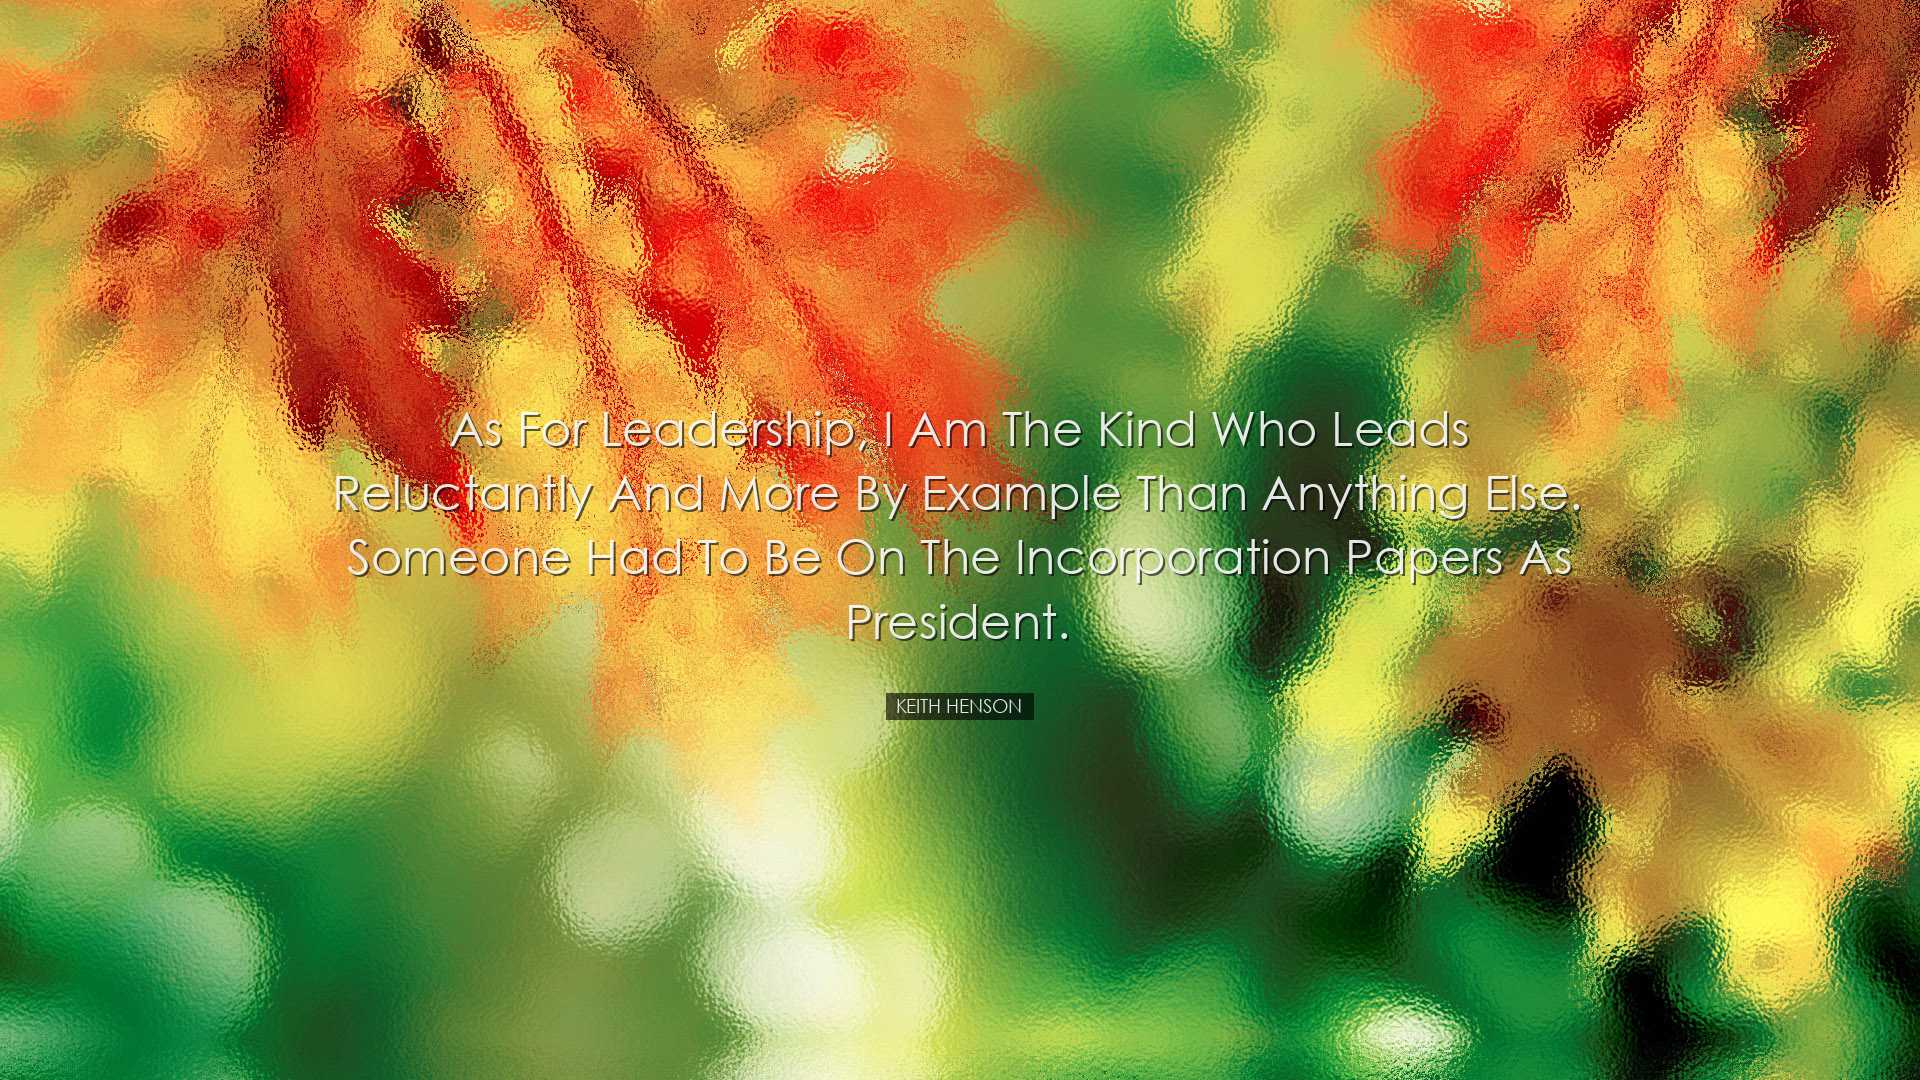 As for leadership, I am the kind who leads reluctantly and more by